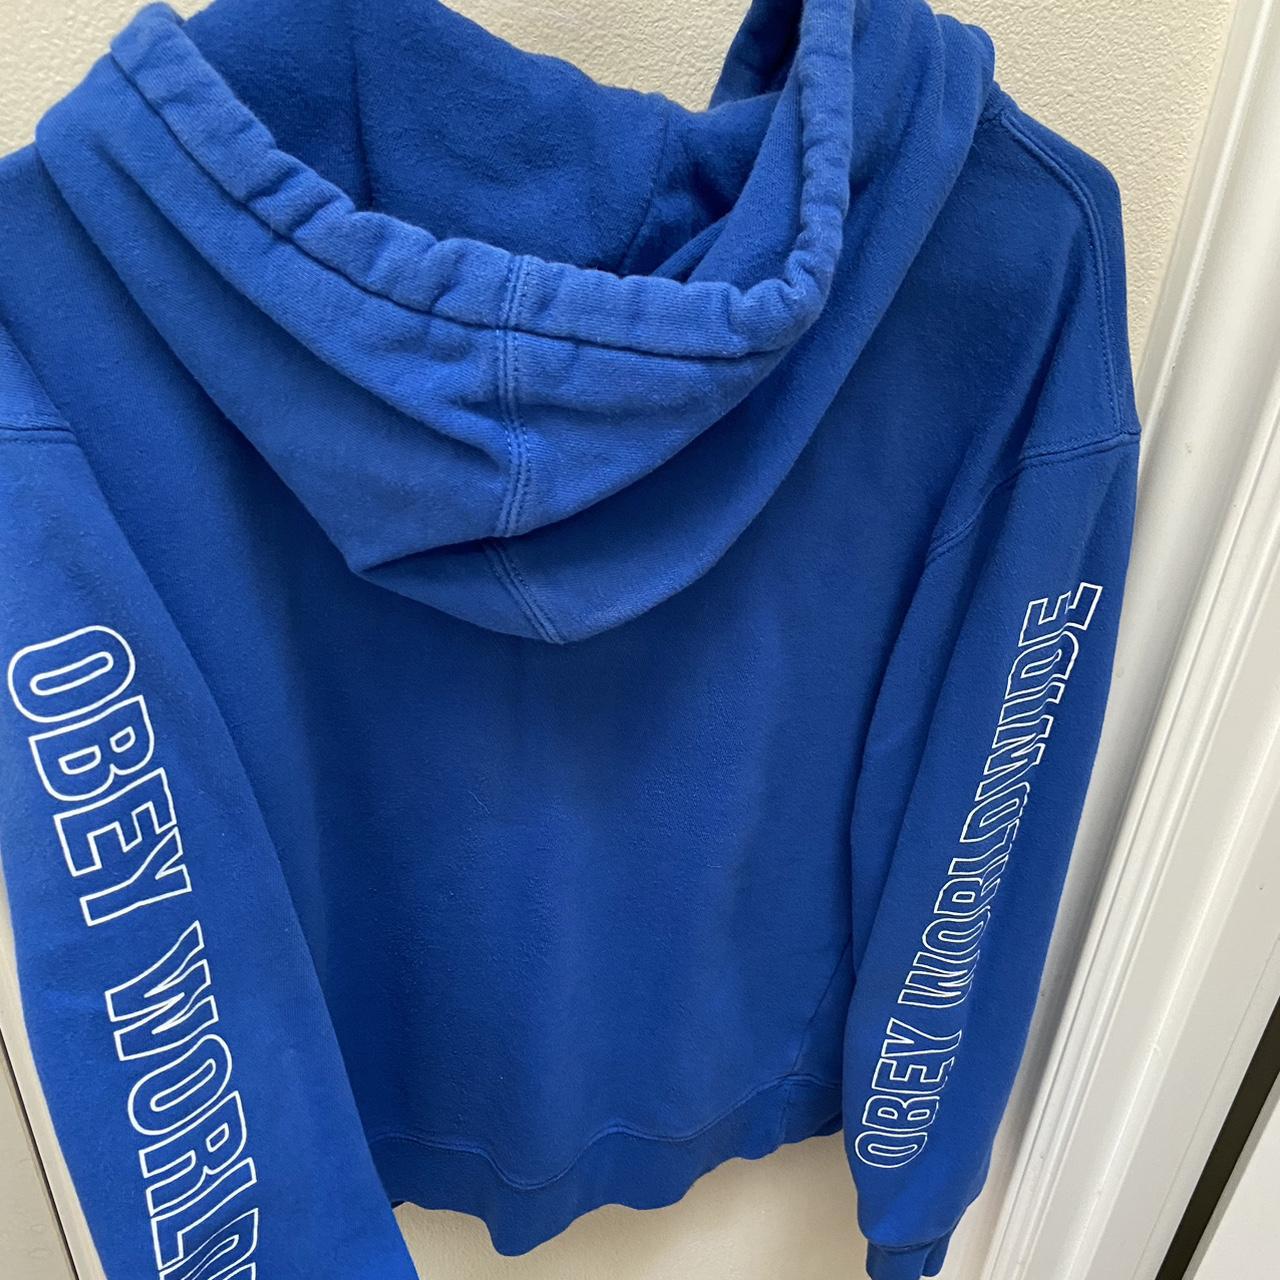 Obey Women's White and Blue Hoodie (3)